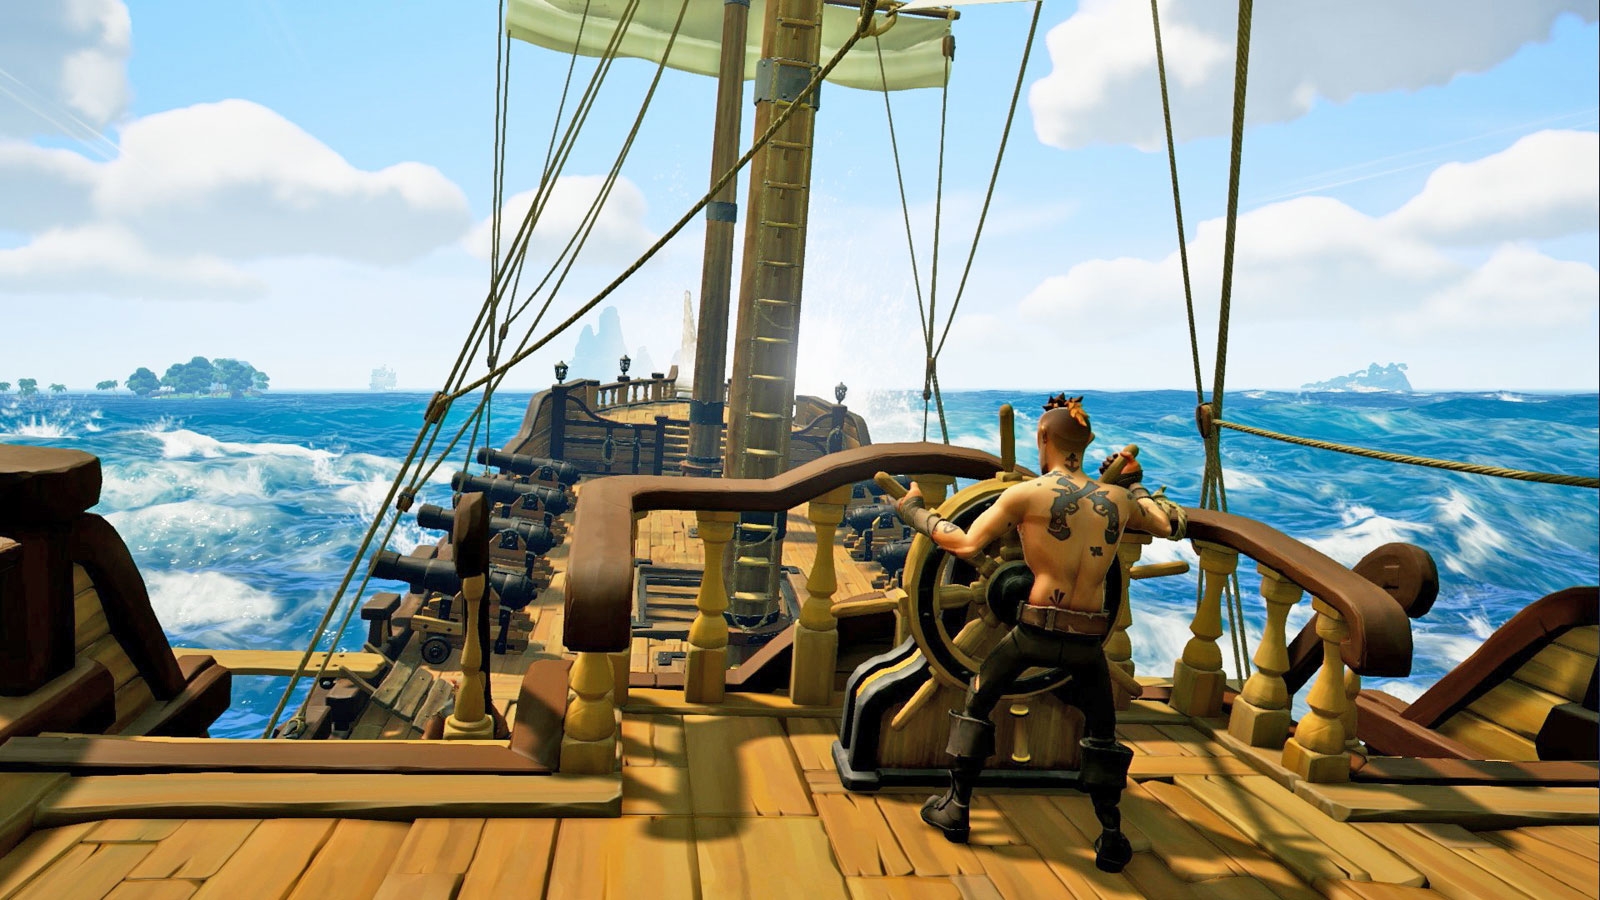 Over a million people have already played 'Sea of Thieves' | DeviceDaily.com